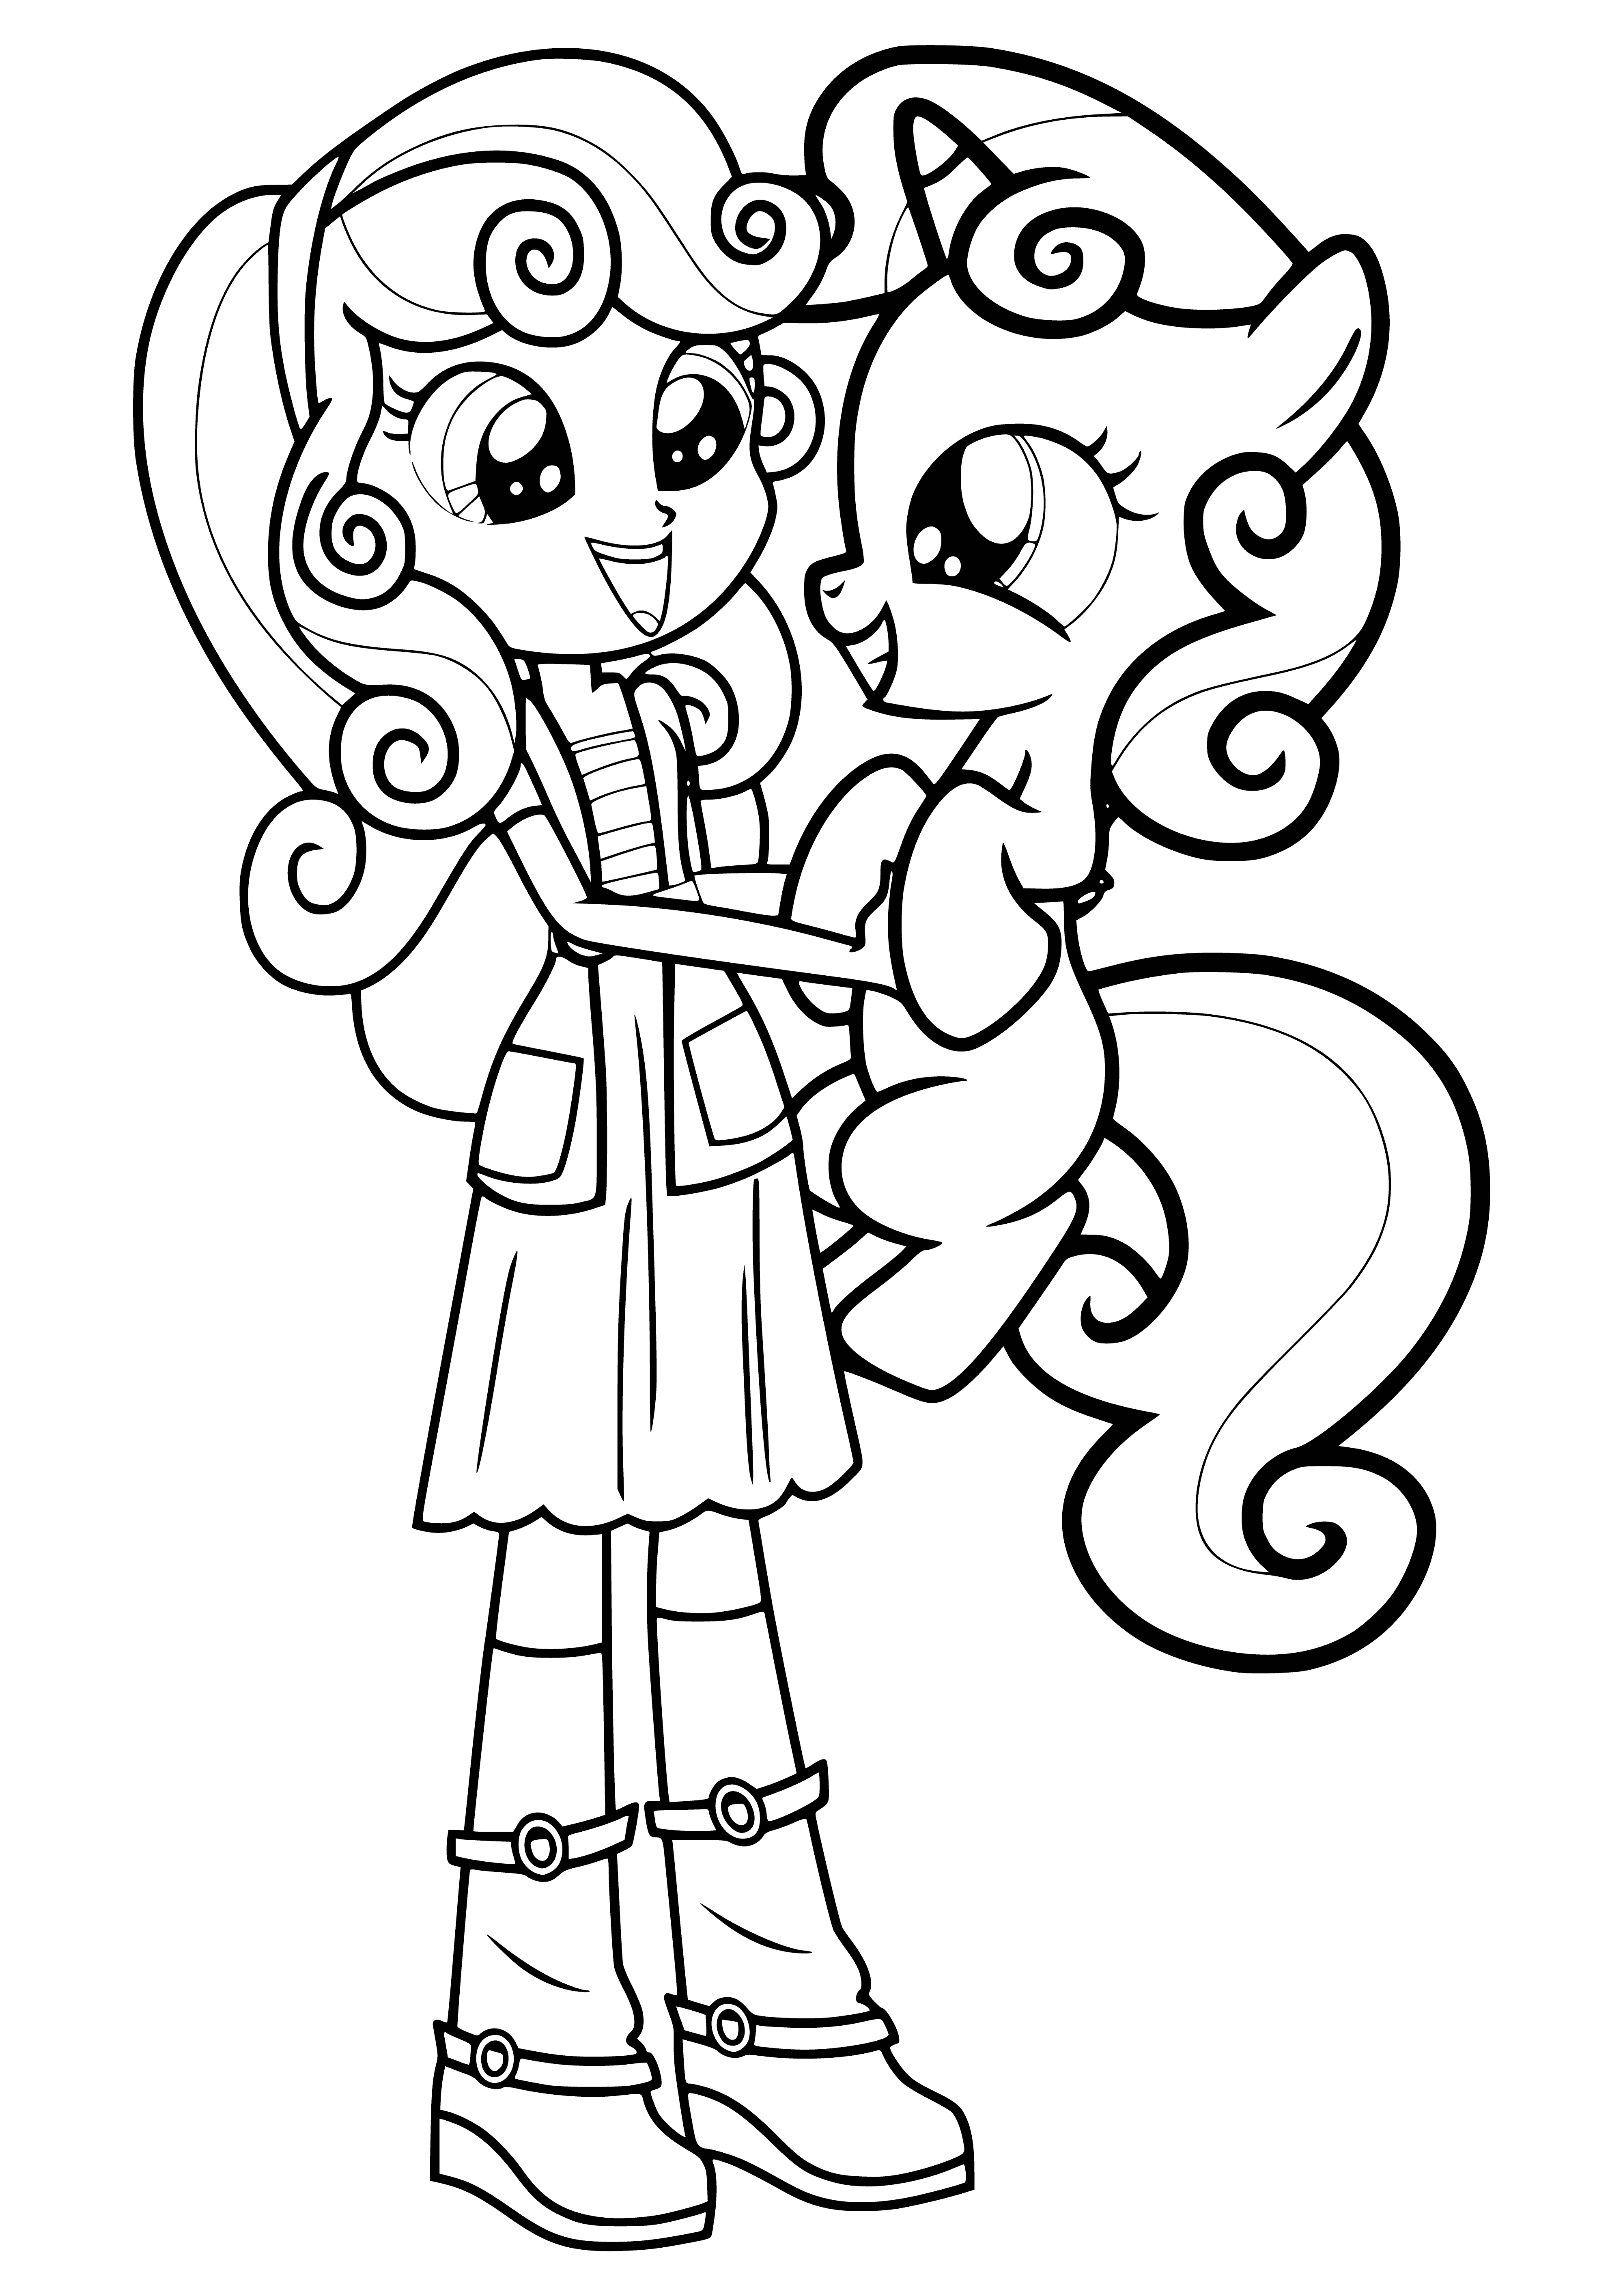 coloring page: Belle is a baby girl-pony with blue eyes, blonde hair & a pink bow. She wears a pink dress with a white collar. #cutie